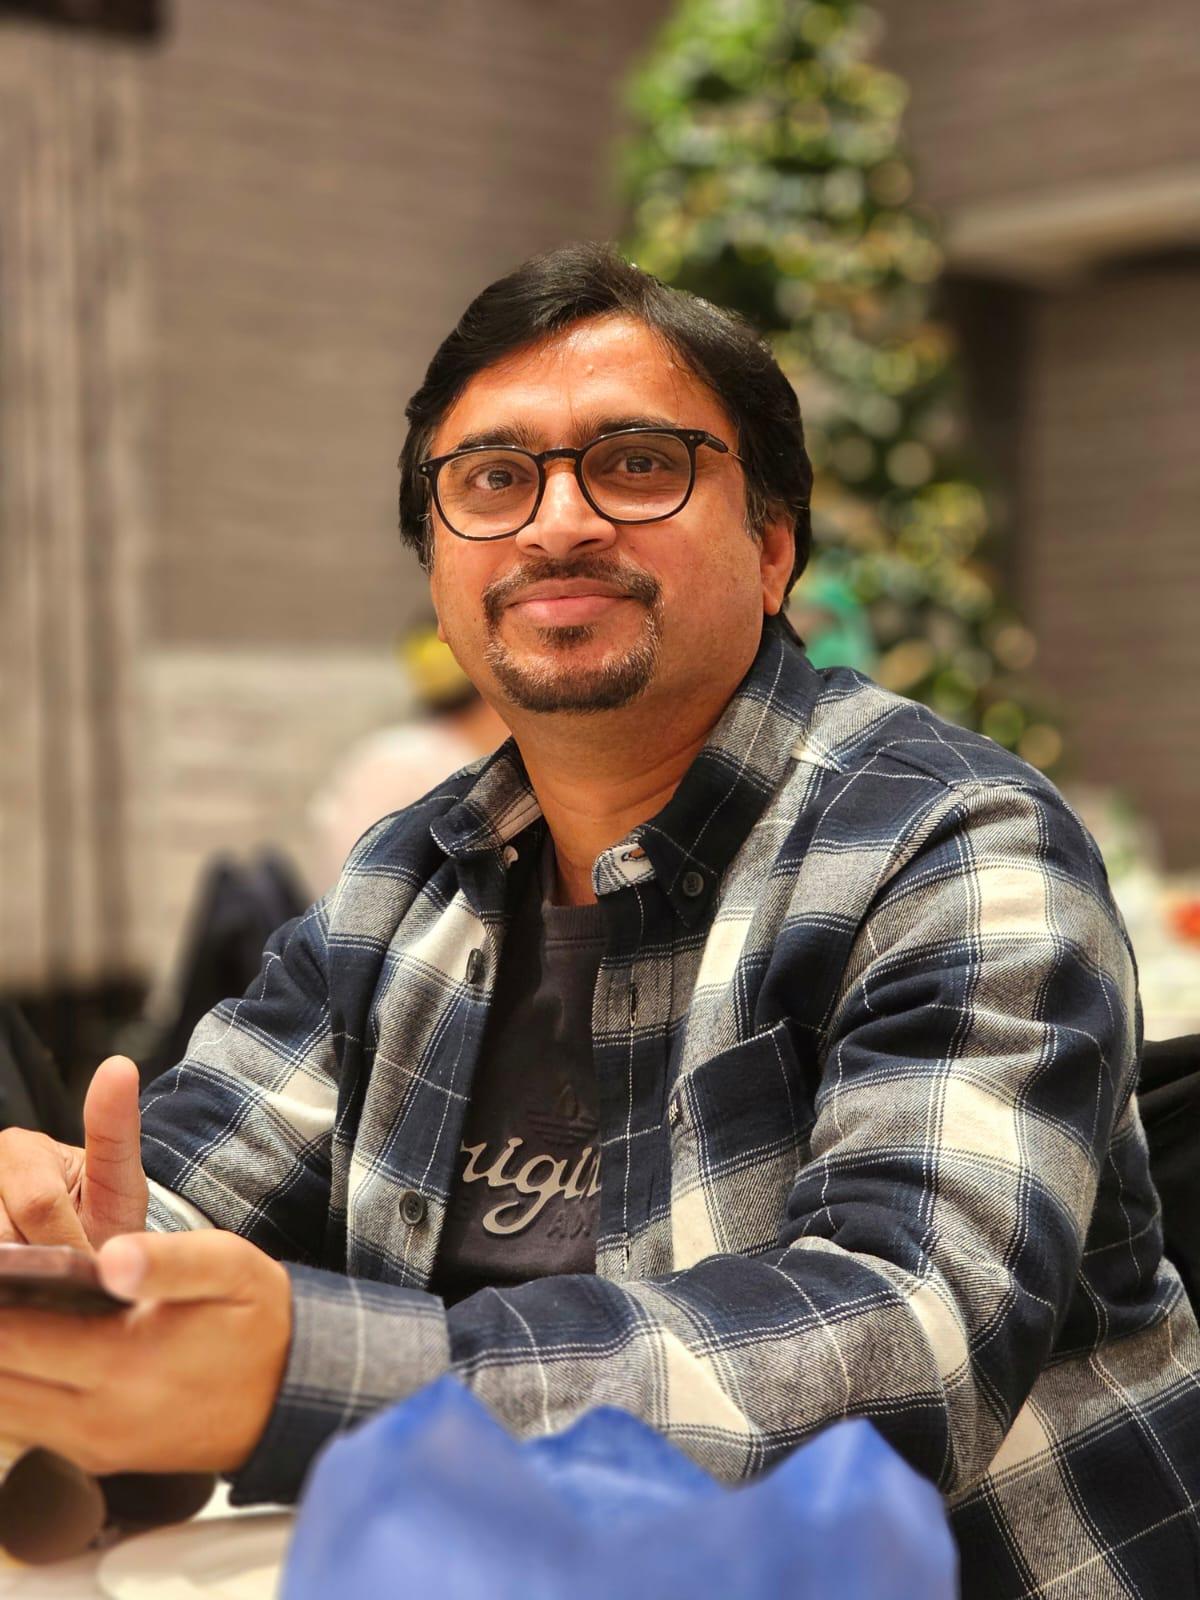 From Code to Leadership - Syed's Journey at OpenSky